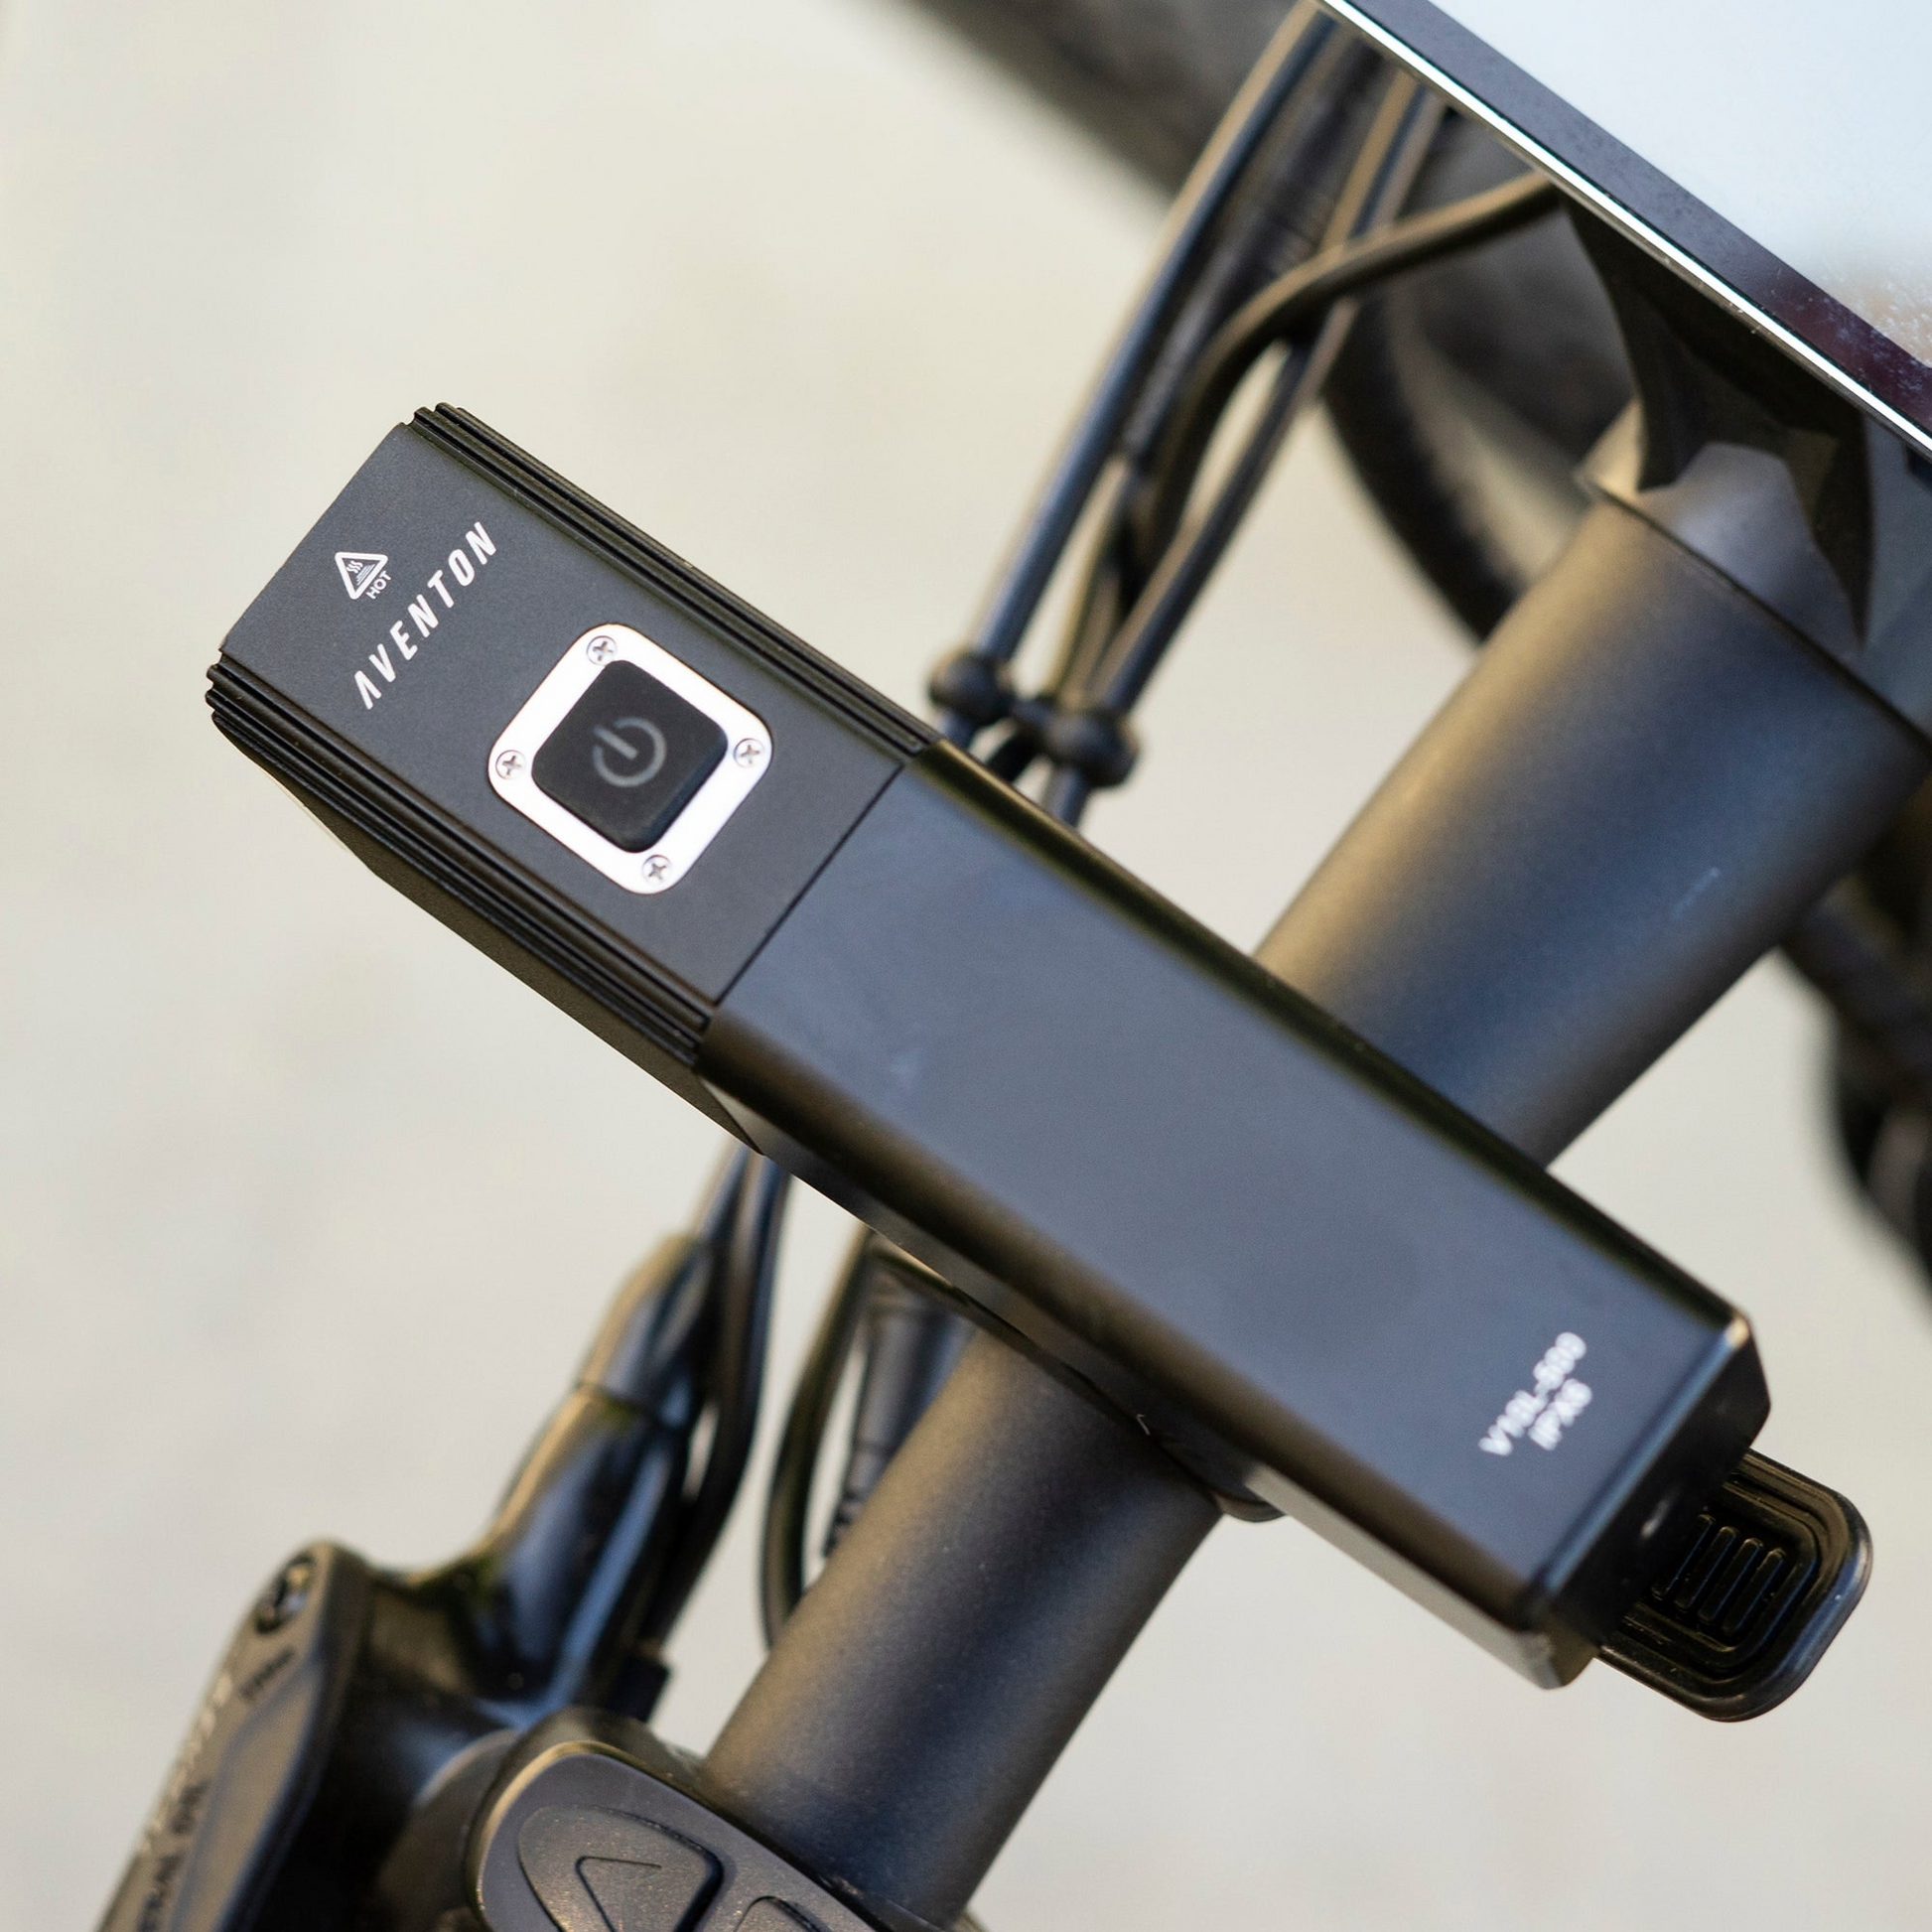 A Aventon safety camera attached to the handlebar of a bicycle, designed for low-light conditions.